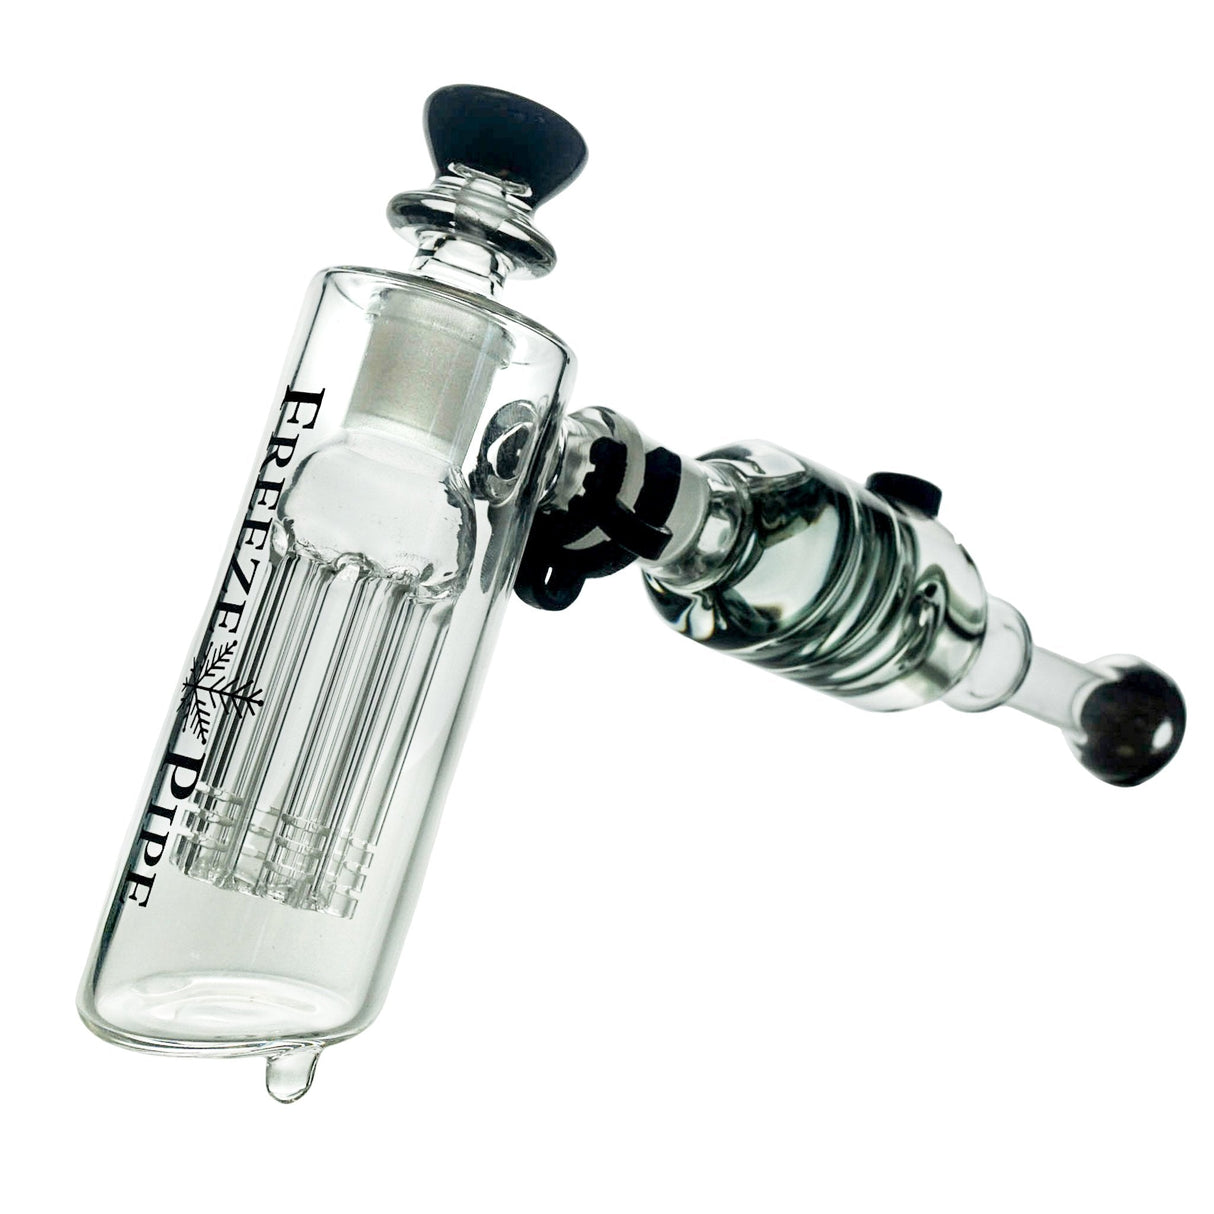 Freeze Pipe Bubbler with Tree Percolator and 18-19mm Joint Size - Angled Side View